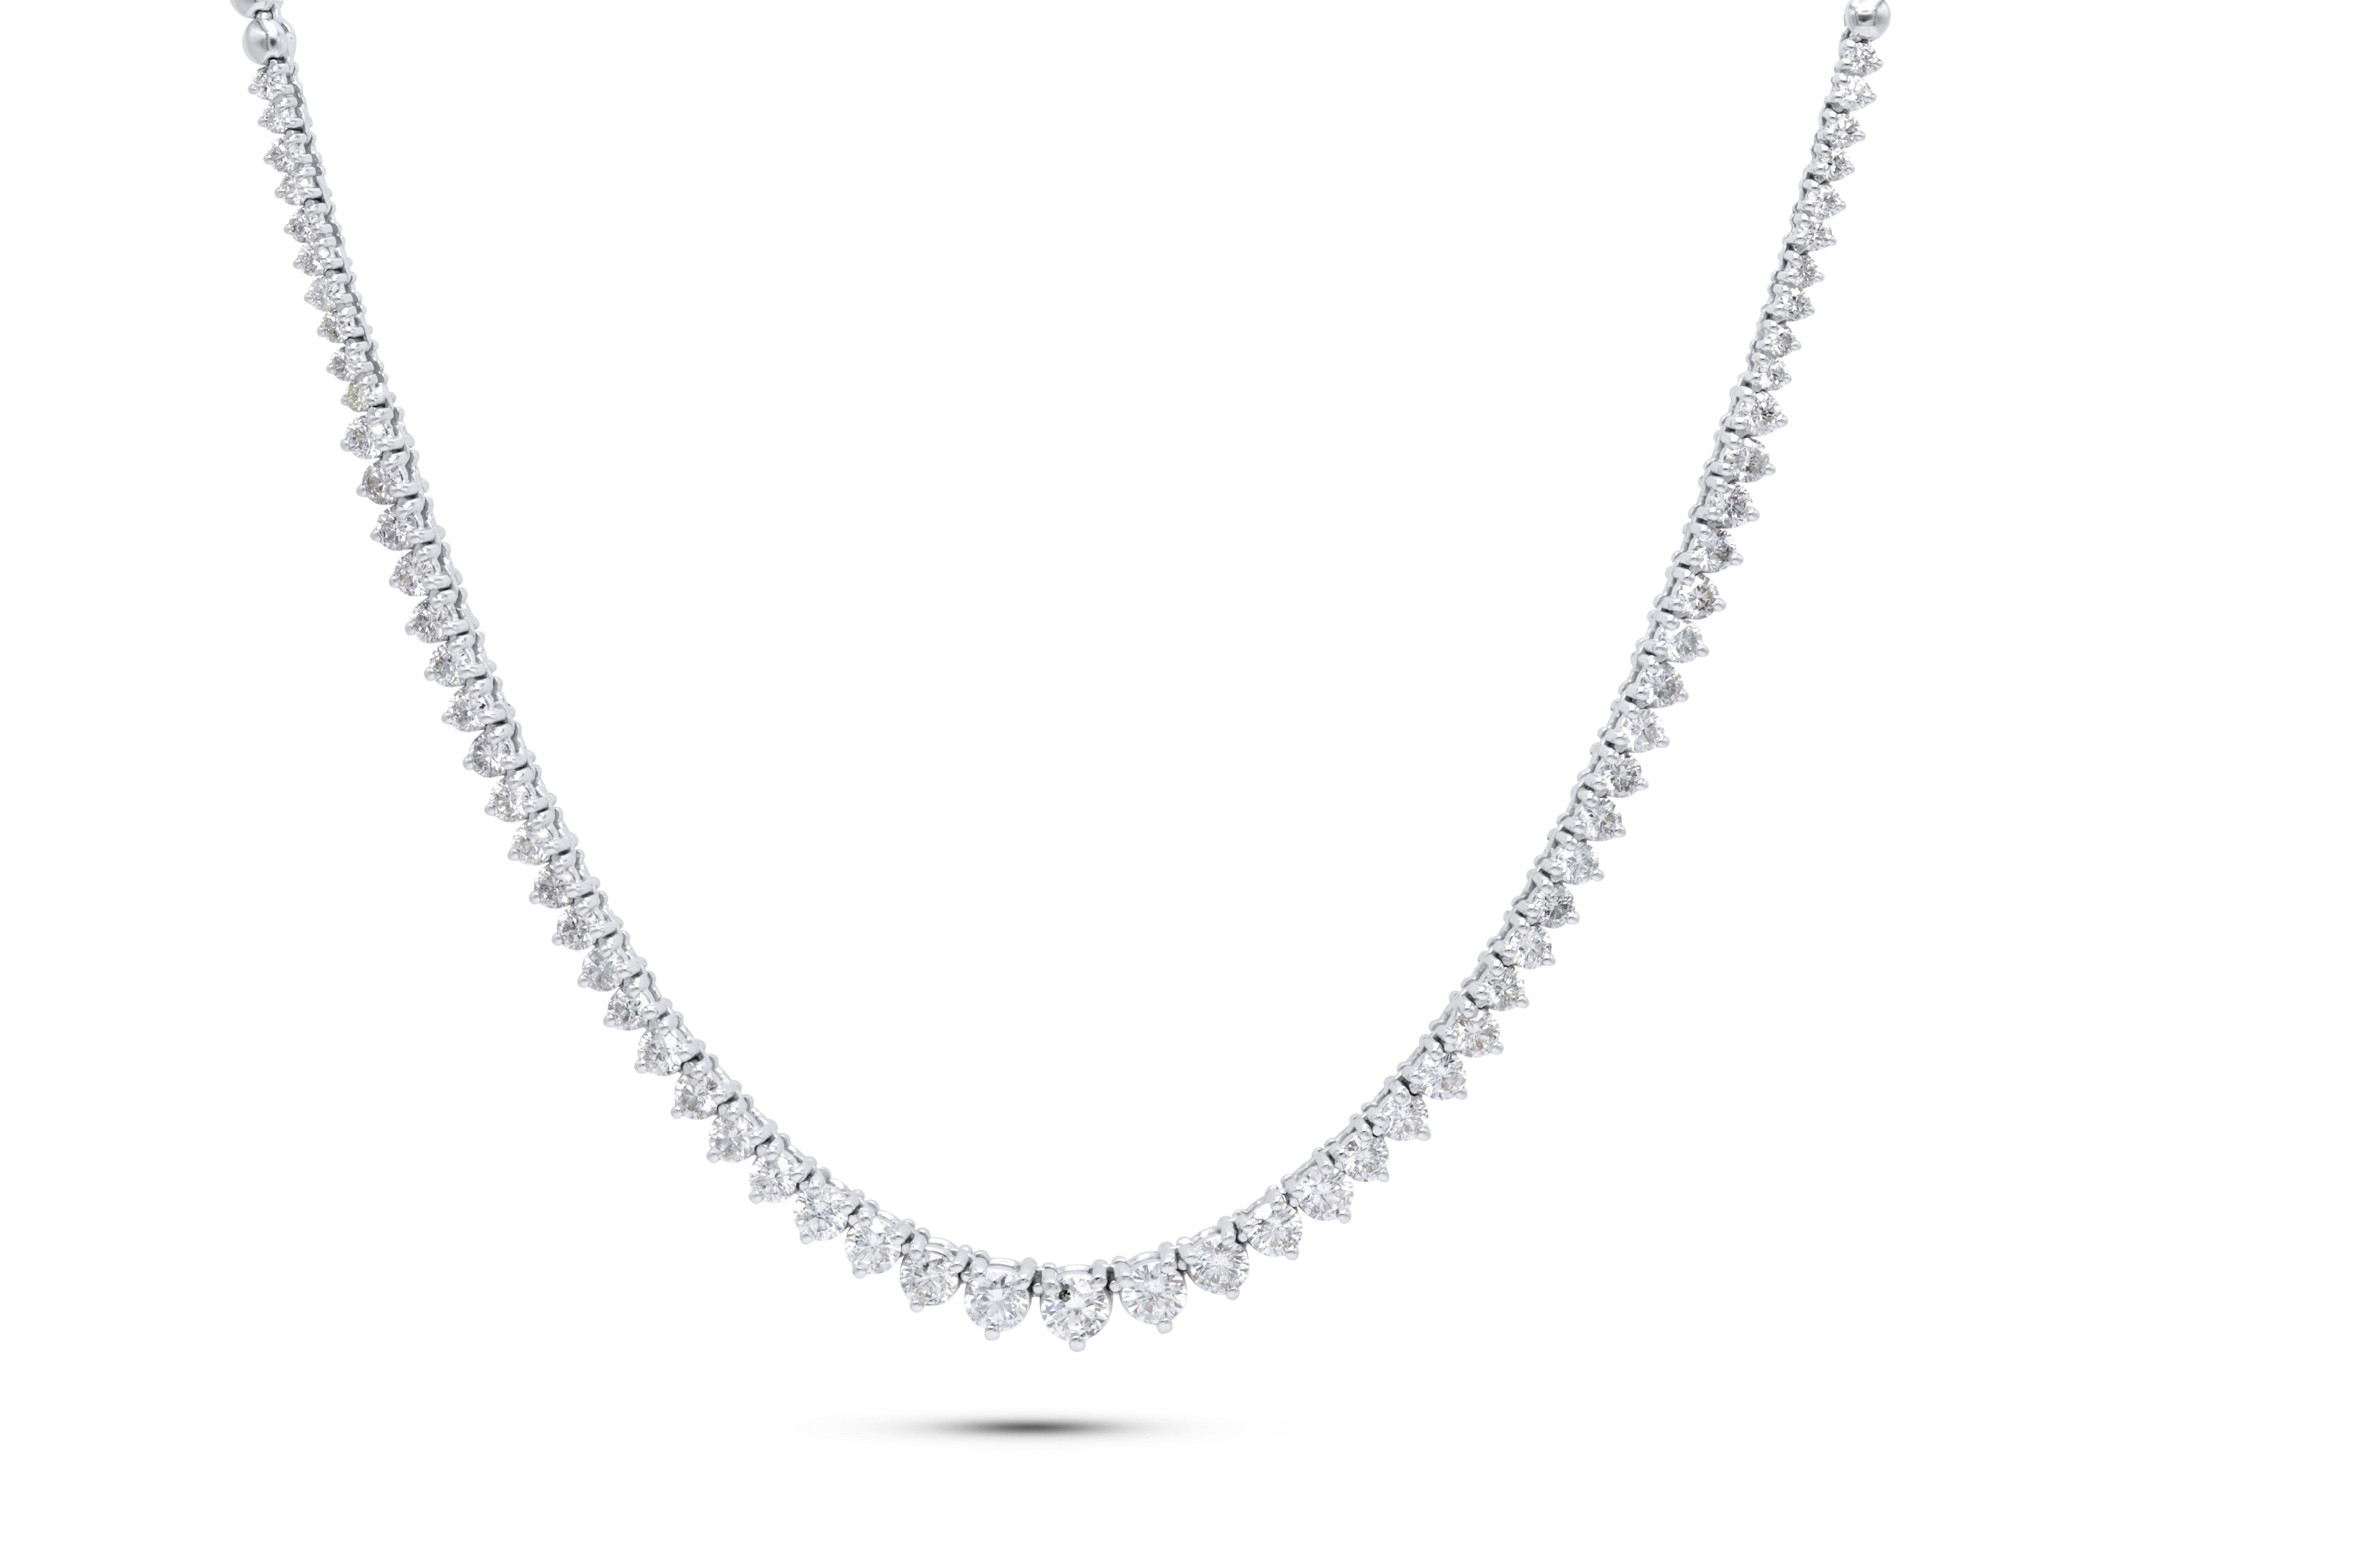 Modern Diana M. 5.15 Cts Round Diamond 18k White Gold Half Graduated Tennis Necklace For Sale